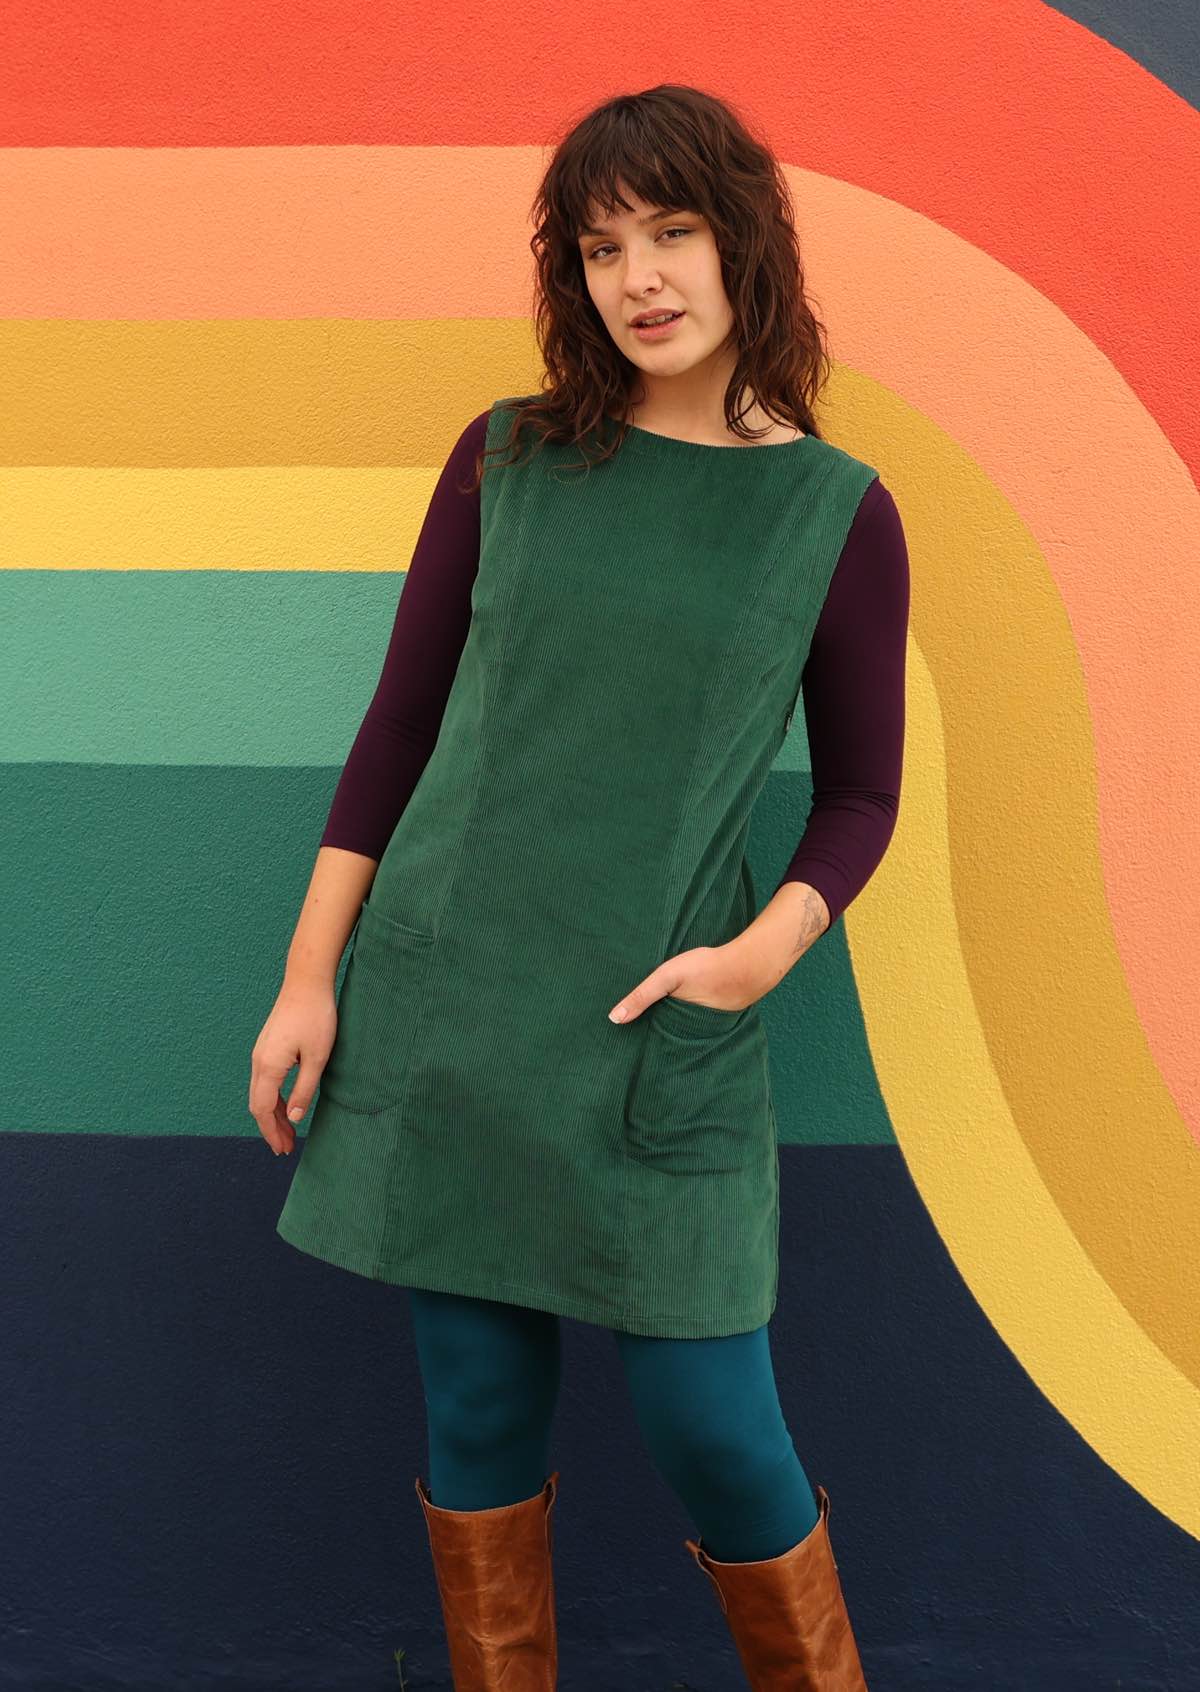 Cotton corduroy tunic looks great layered over leggings and top